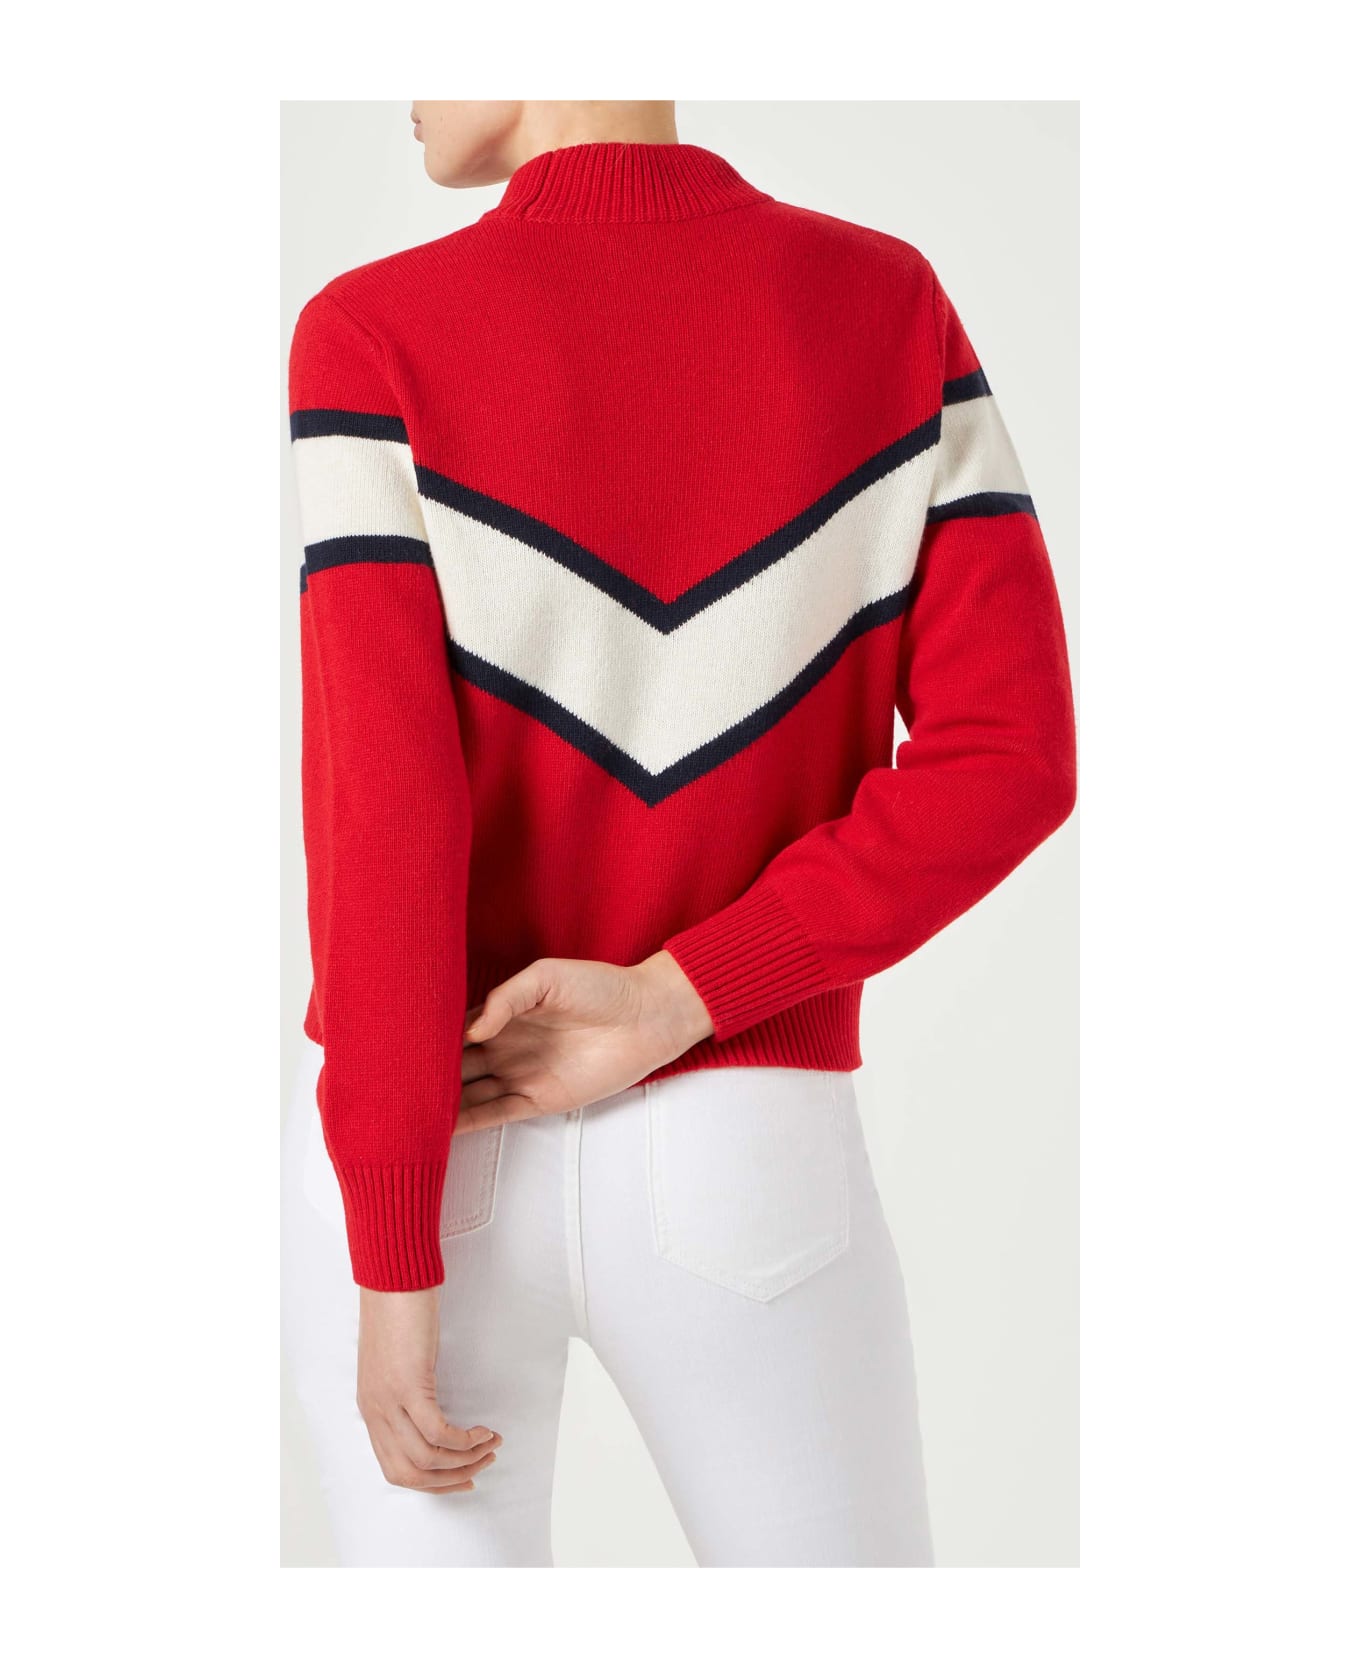 MC2 Saint Barth Woman Half-turtleneck Sweater With Apres Ski Queen Lettering - RED